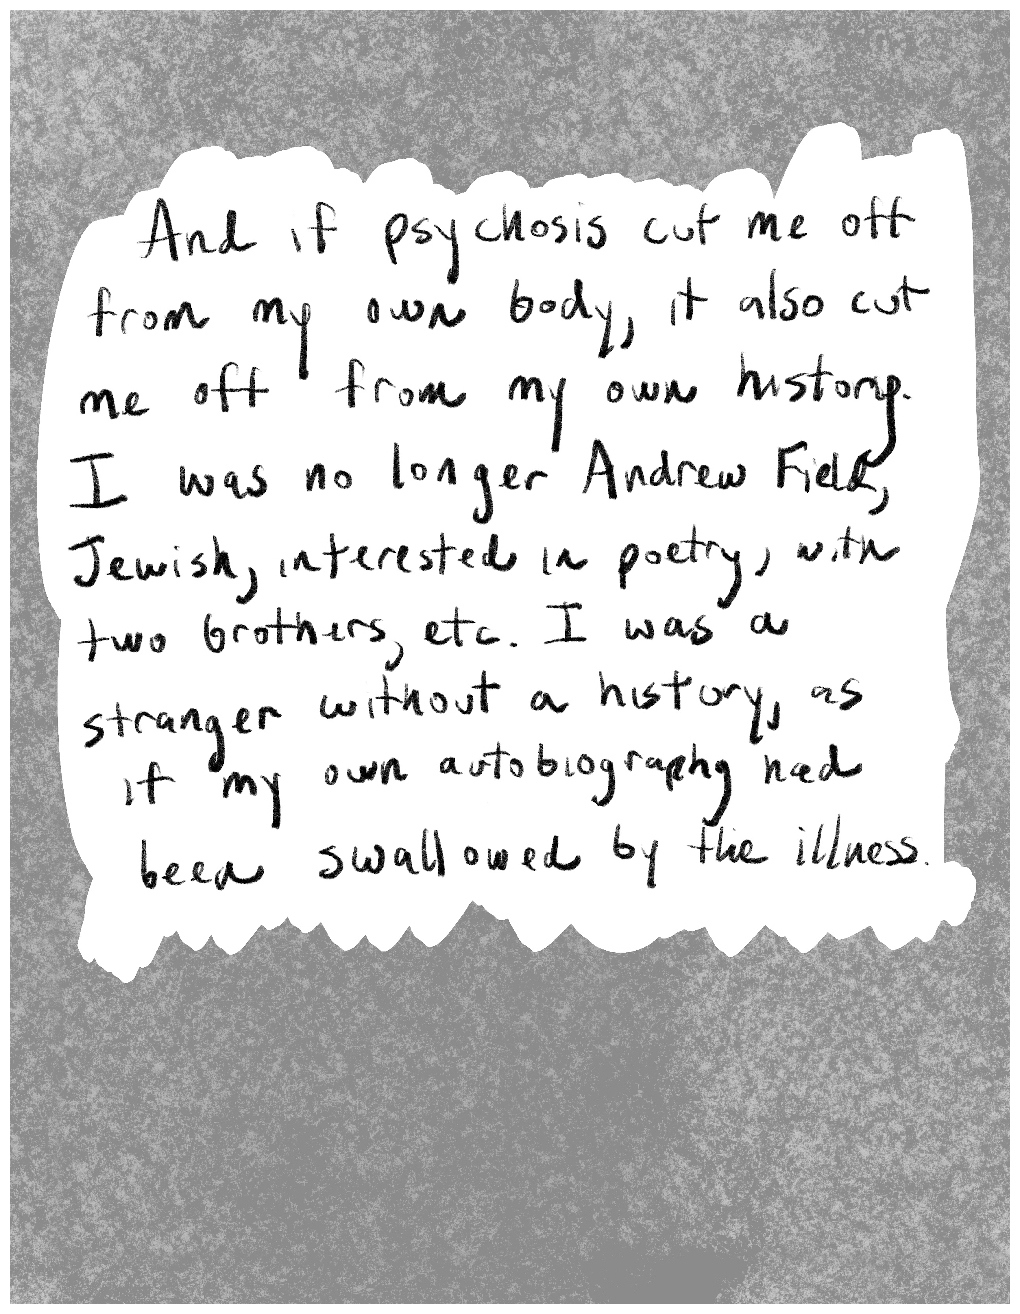 Panel 4 of a four-panel comic called "Disembodied and alone'', consisting of hand-written black text in a white space surrounded by a mottled grey background. The text says: "And if psychosis cut me off from my own body, it also cut me off from my own history. I was no longer Andrew Field, Jewish, interested in poetry, with two brothers etc. I was a stranger without a history, as if my own autobiography had been swallowed by the illness."